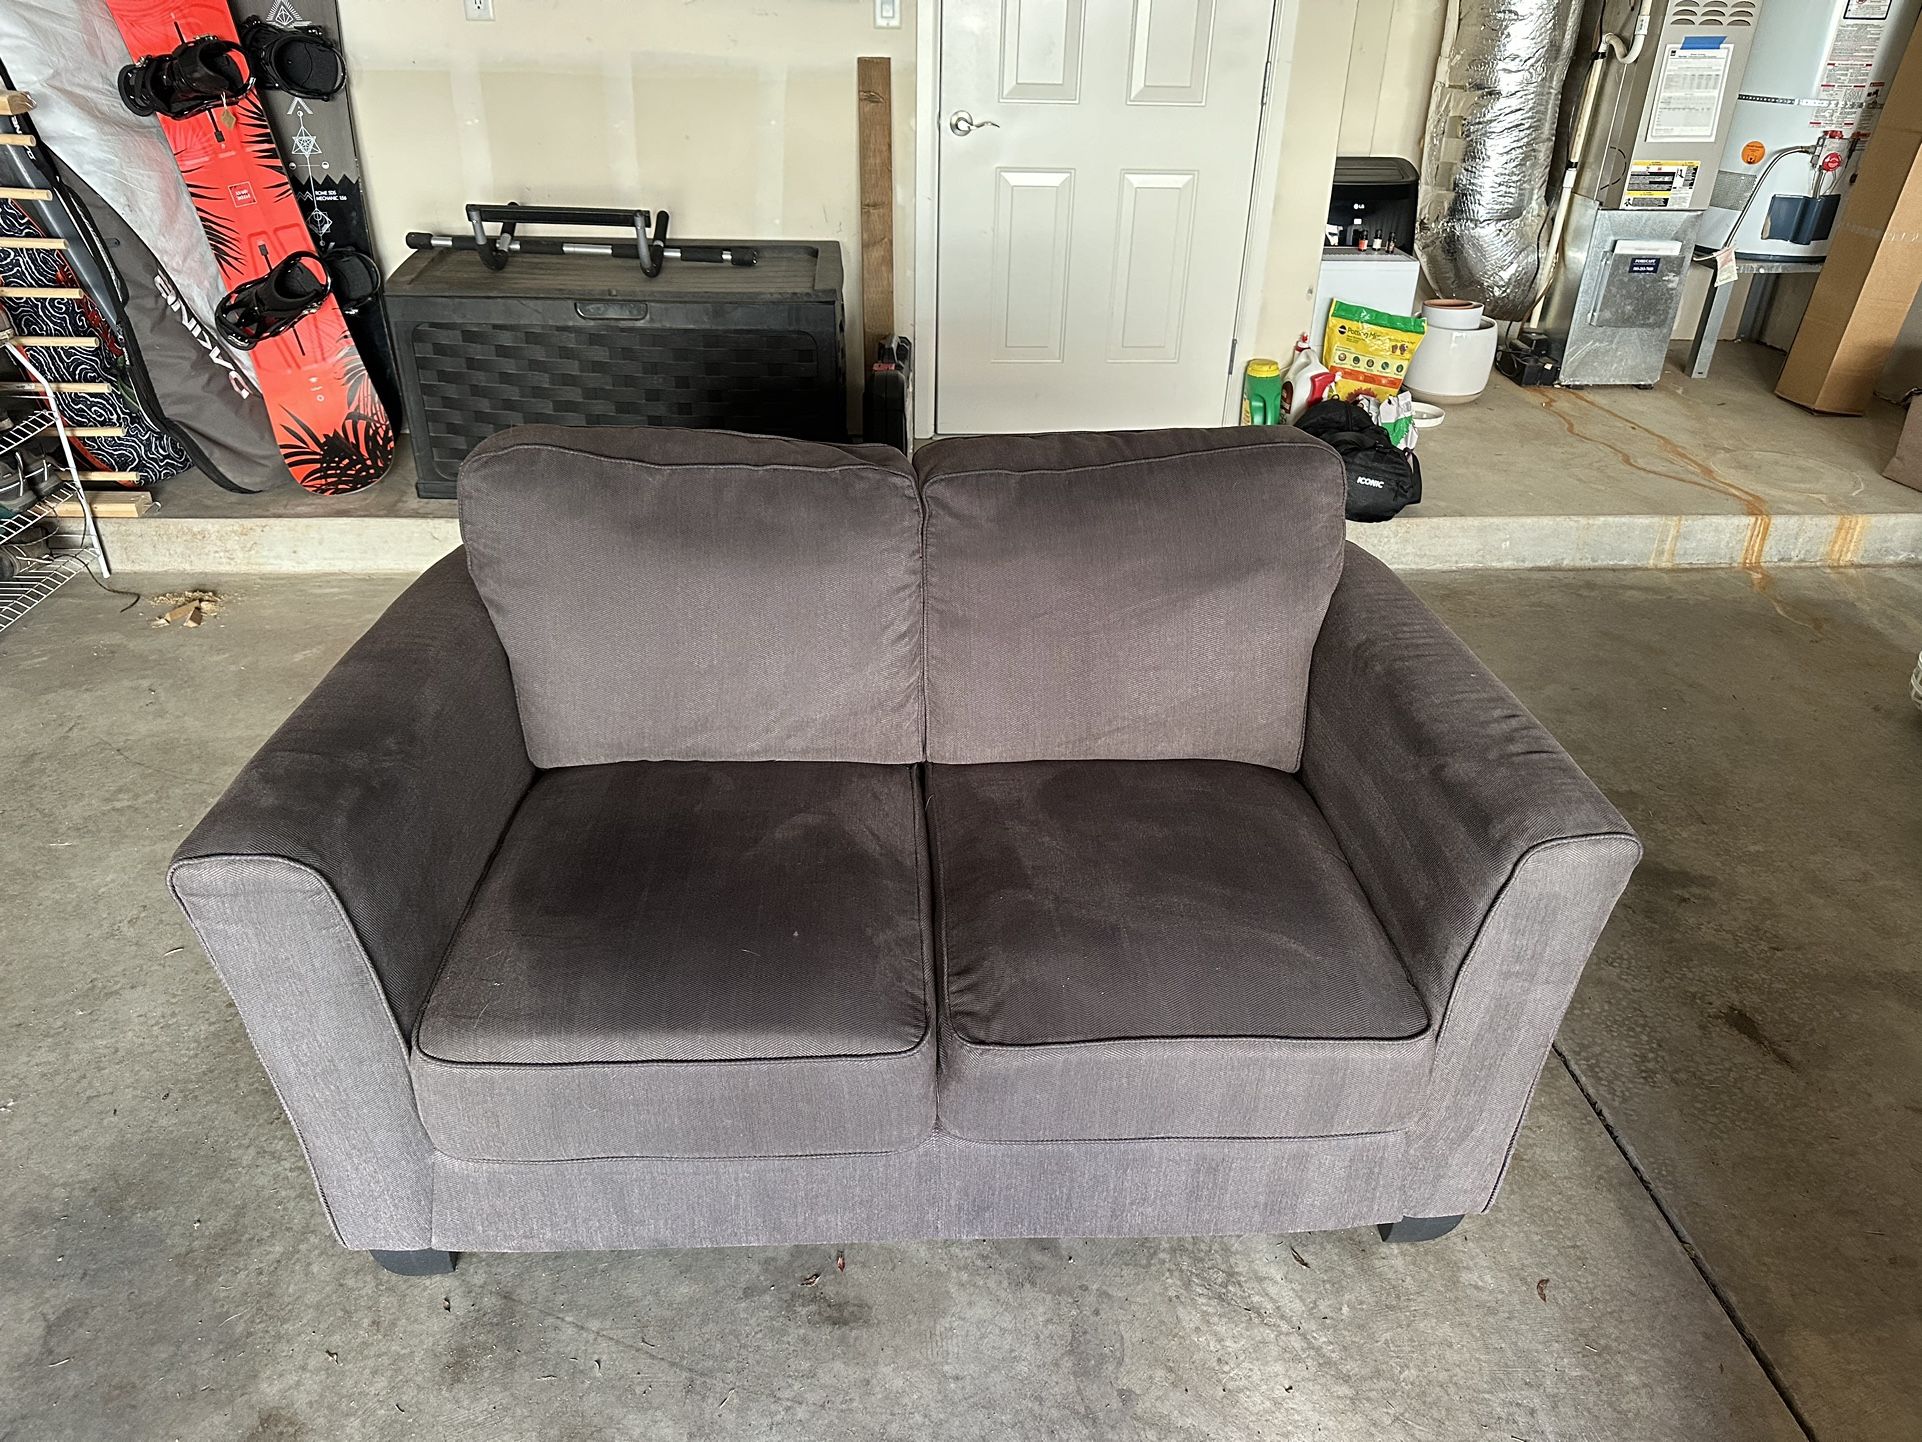 Couch Set For Sale $75